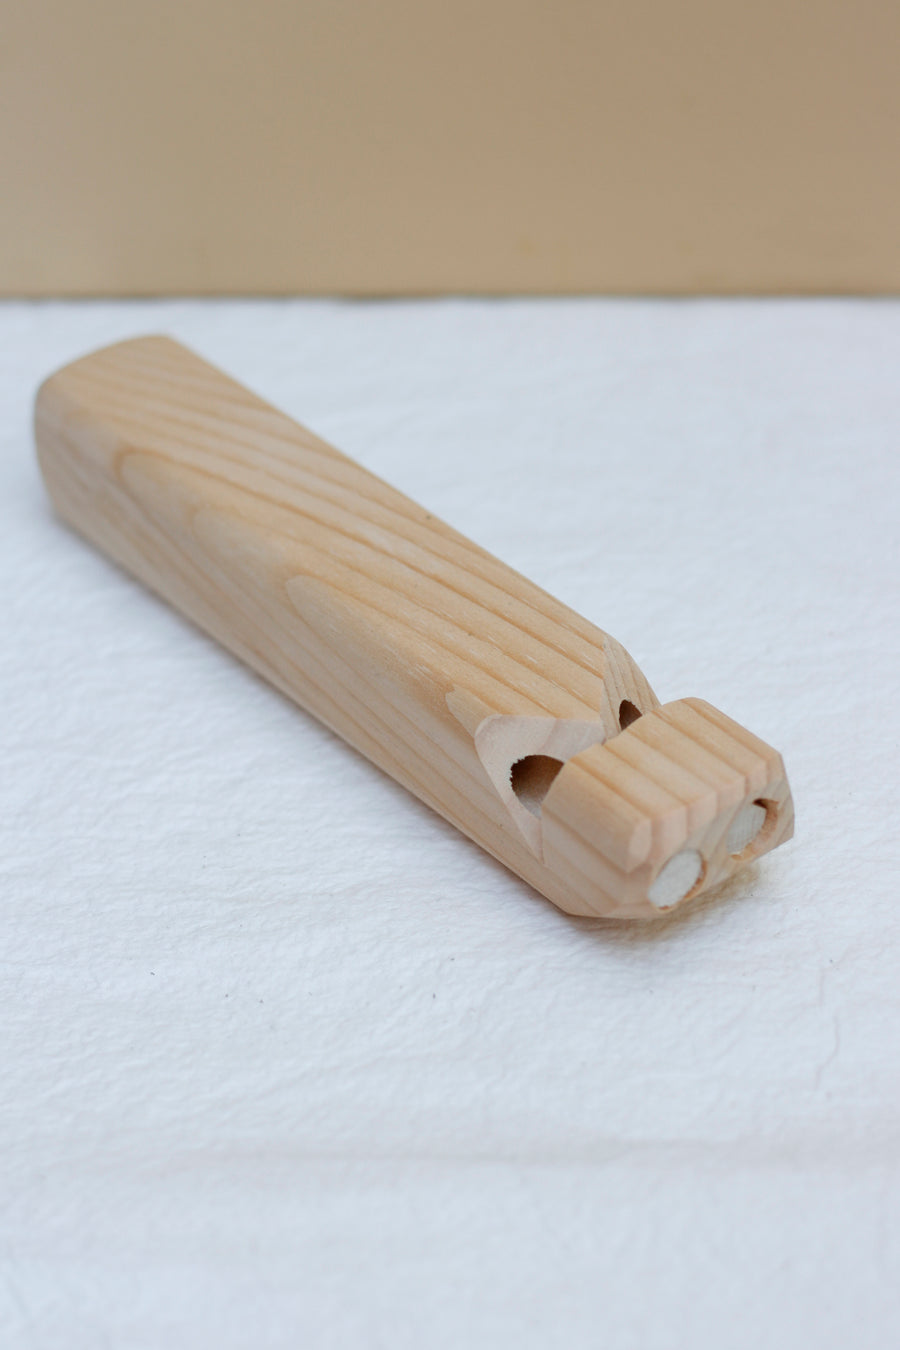 Wooden train whistle by Thorpe Toys